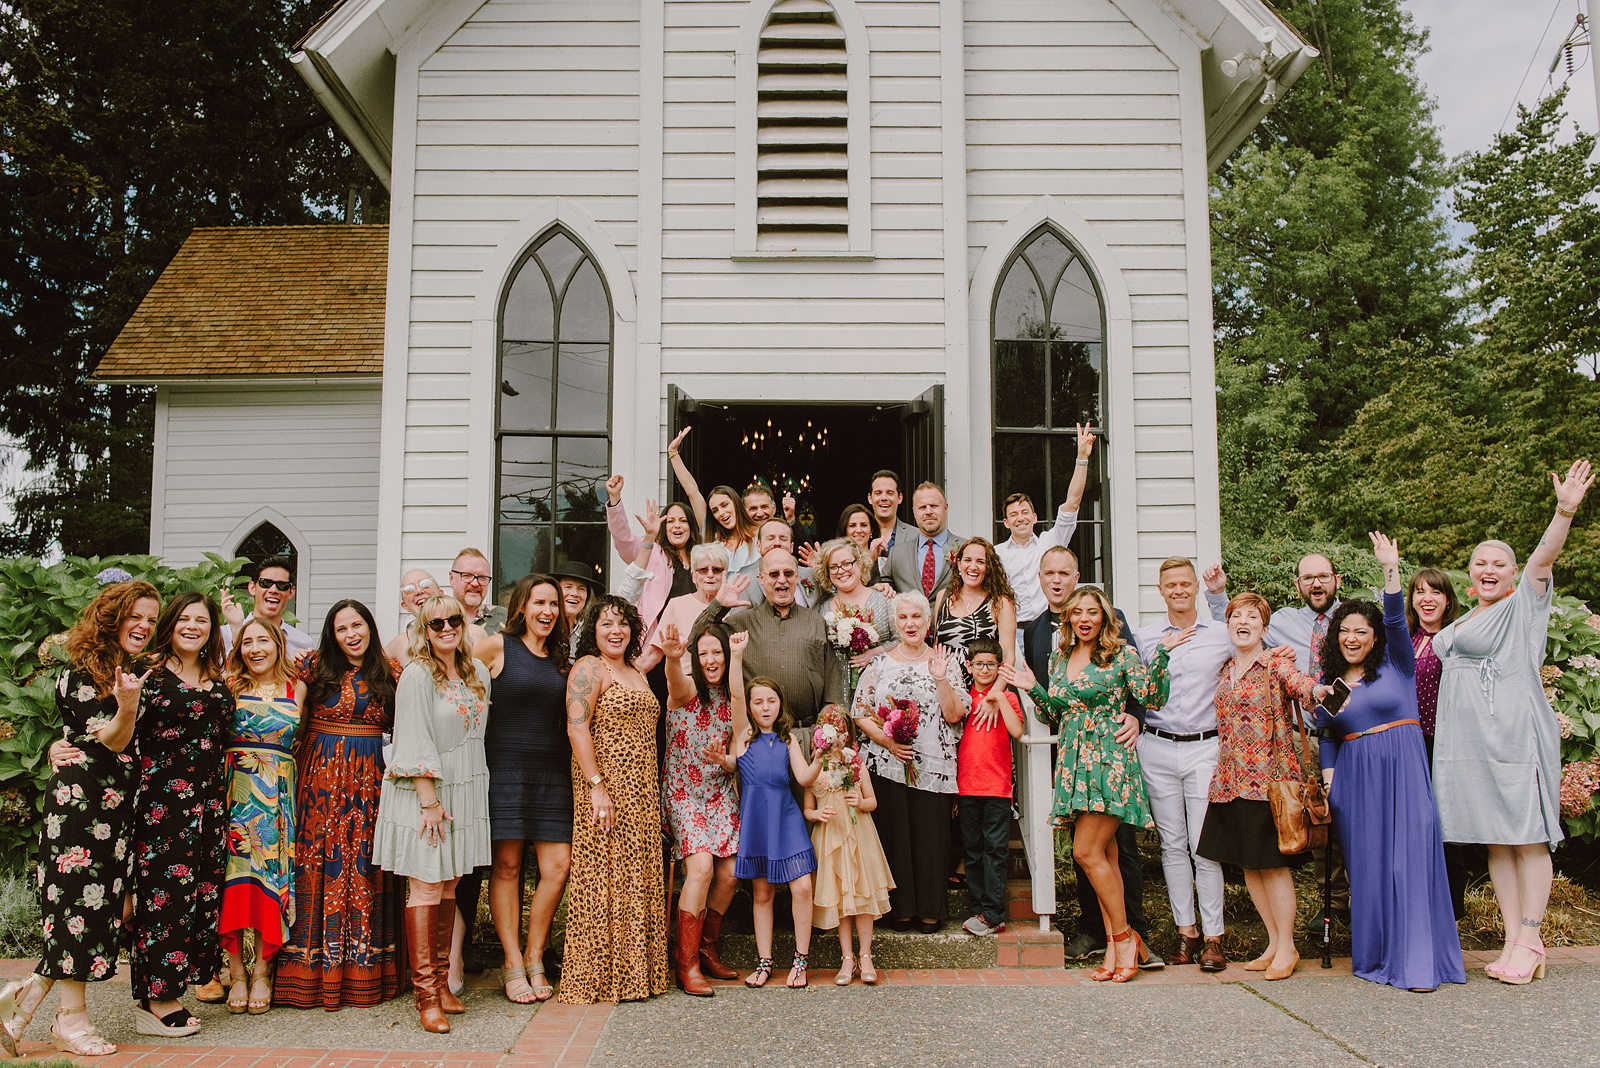 Group photo of the newlyweds and all their guests on the front steps - Oaks Pioneer Church wedding in Sellwood, OR